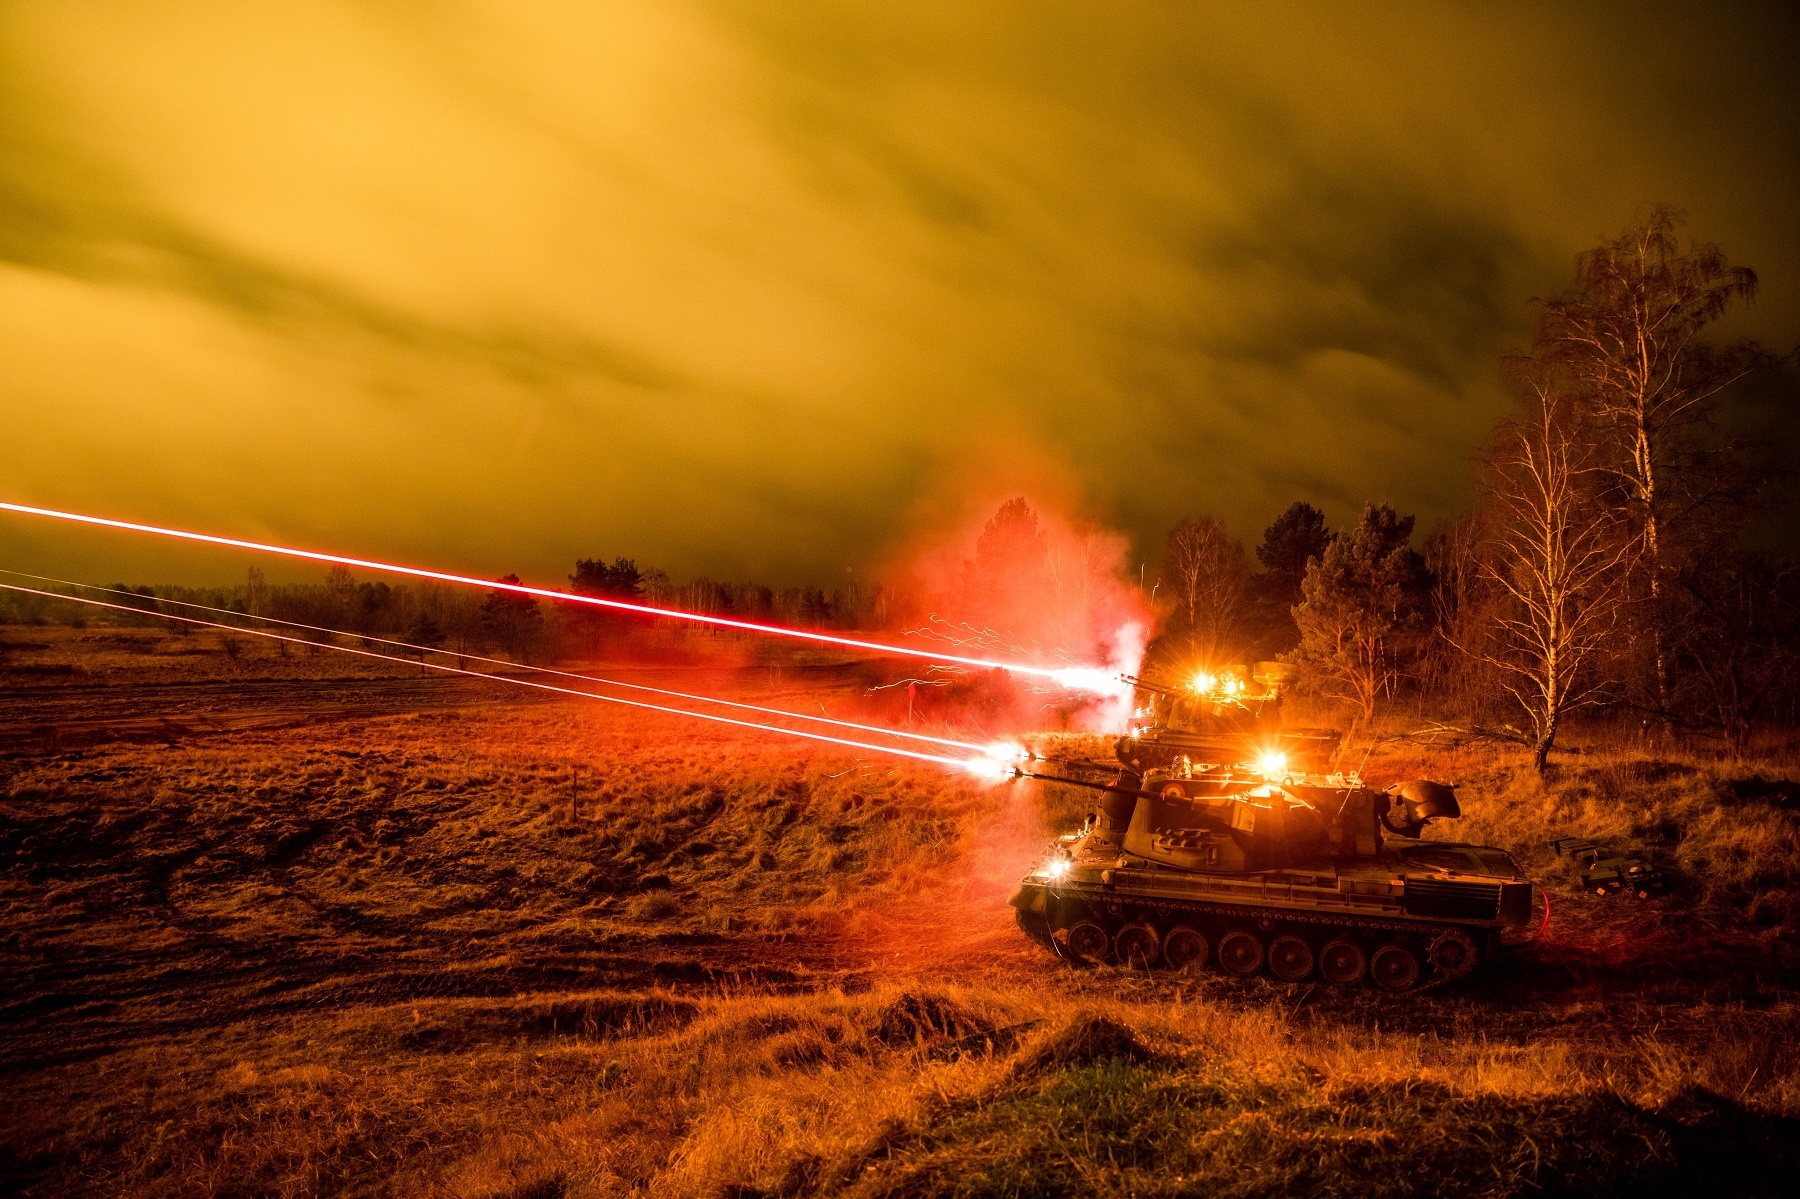 Romanian Land Forces Iron Cheetahs Conduct First Night Live Fire at Bemowo Piskie Training Area, Poland